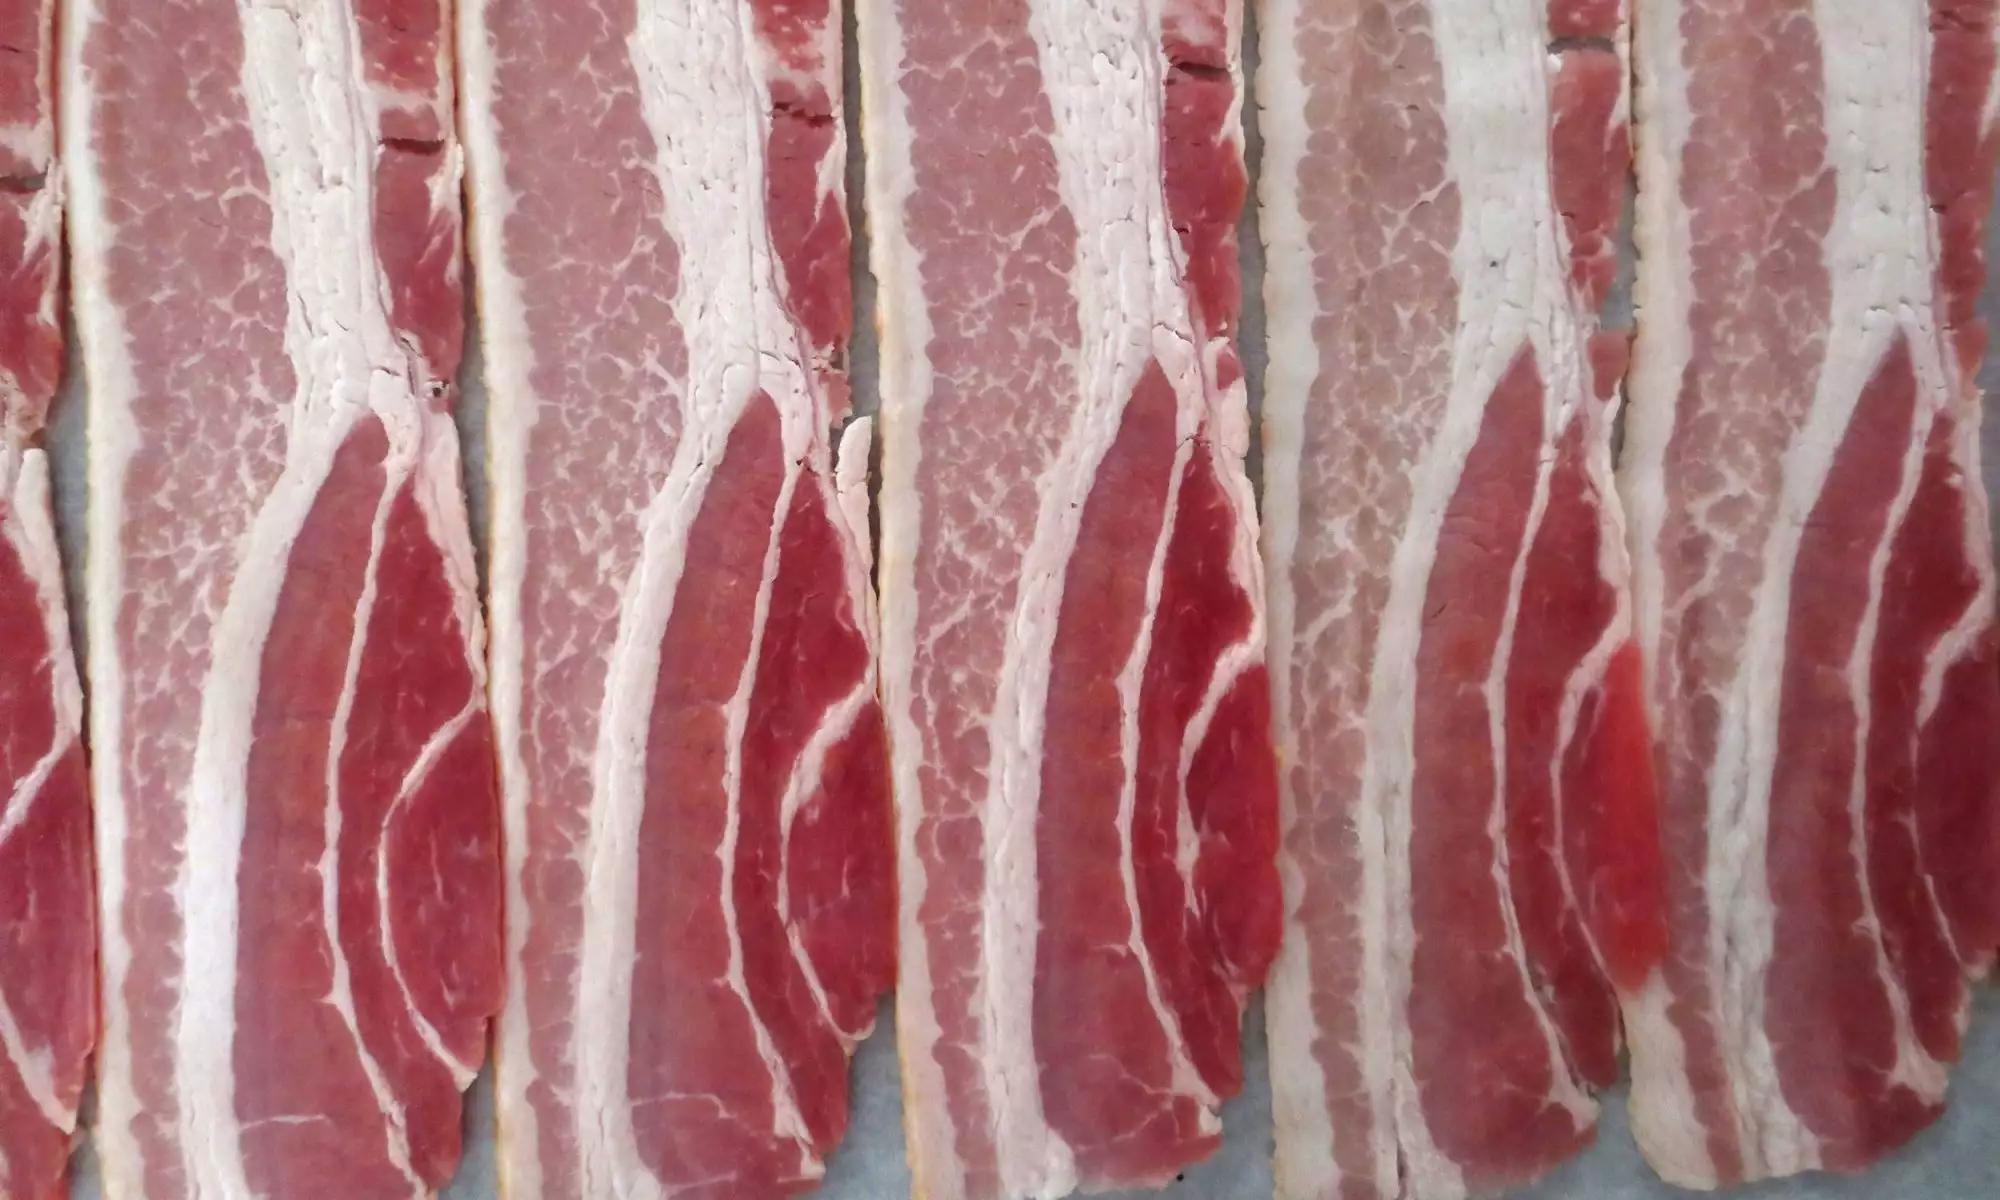 is it safe to eat smoked bacon raw - Can smoked bacon be eaten uncooked